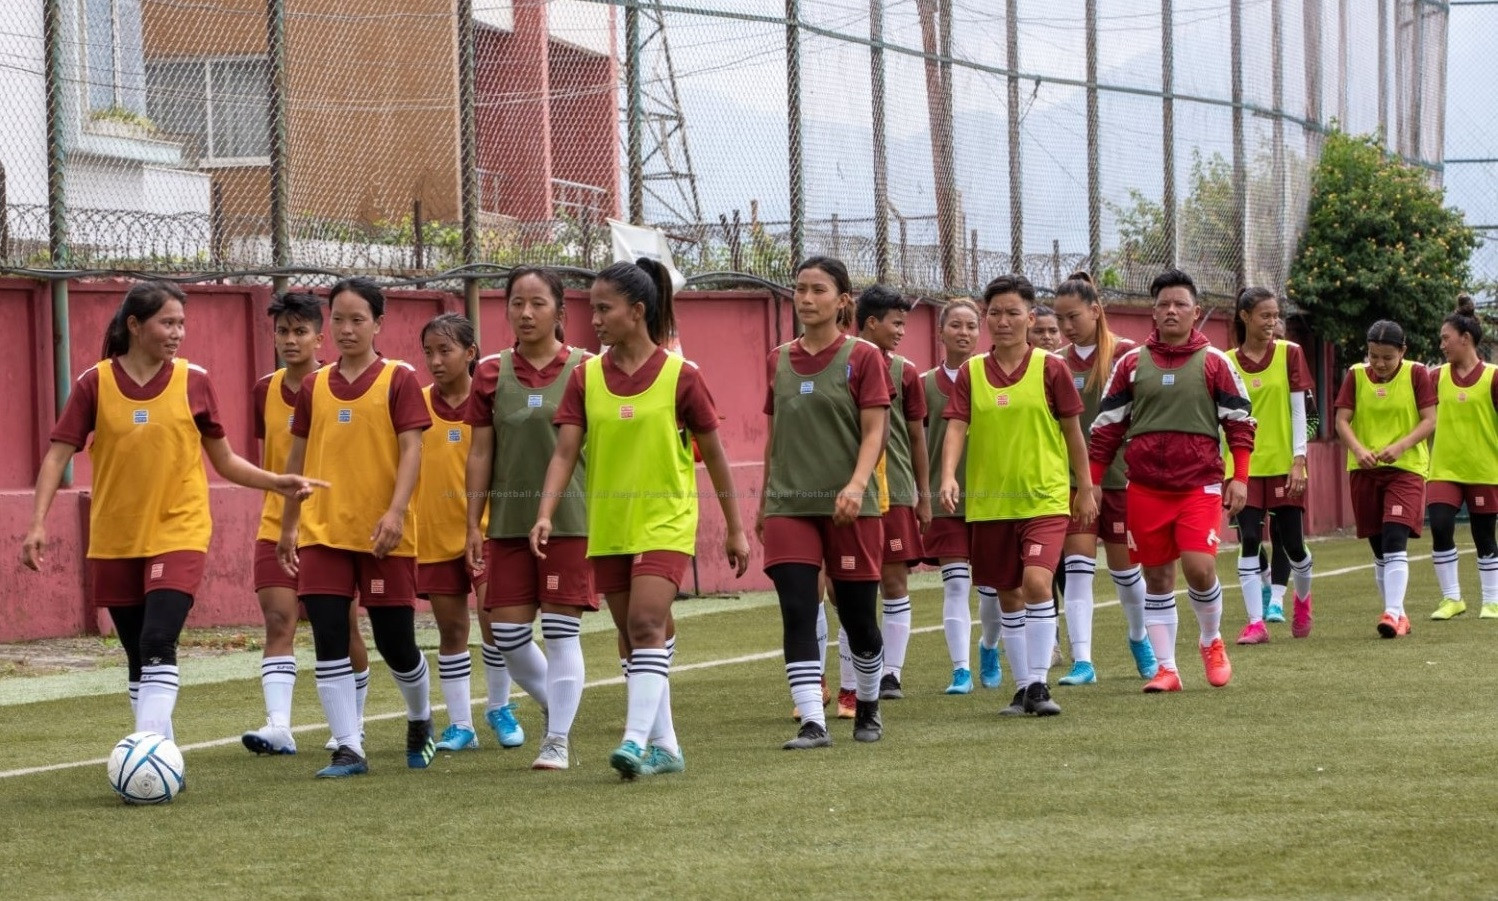 Nepal is set to host Group C matches in the first round of the Asian women's Olympic football qualification tournament ©ANFA